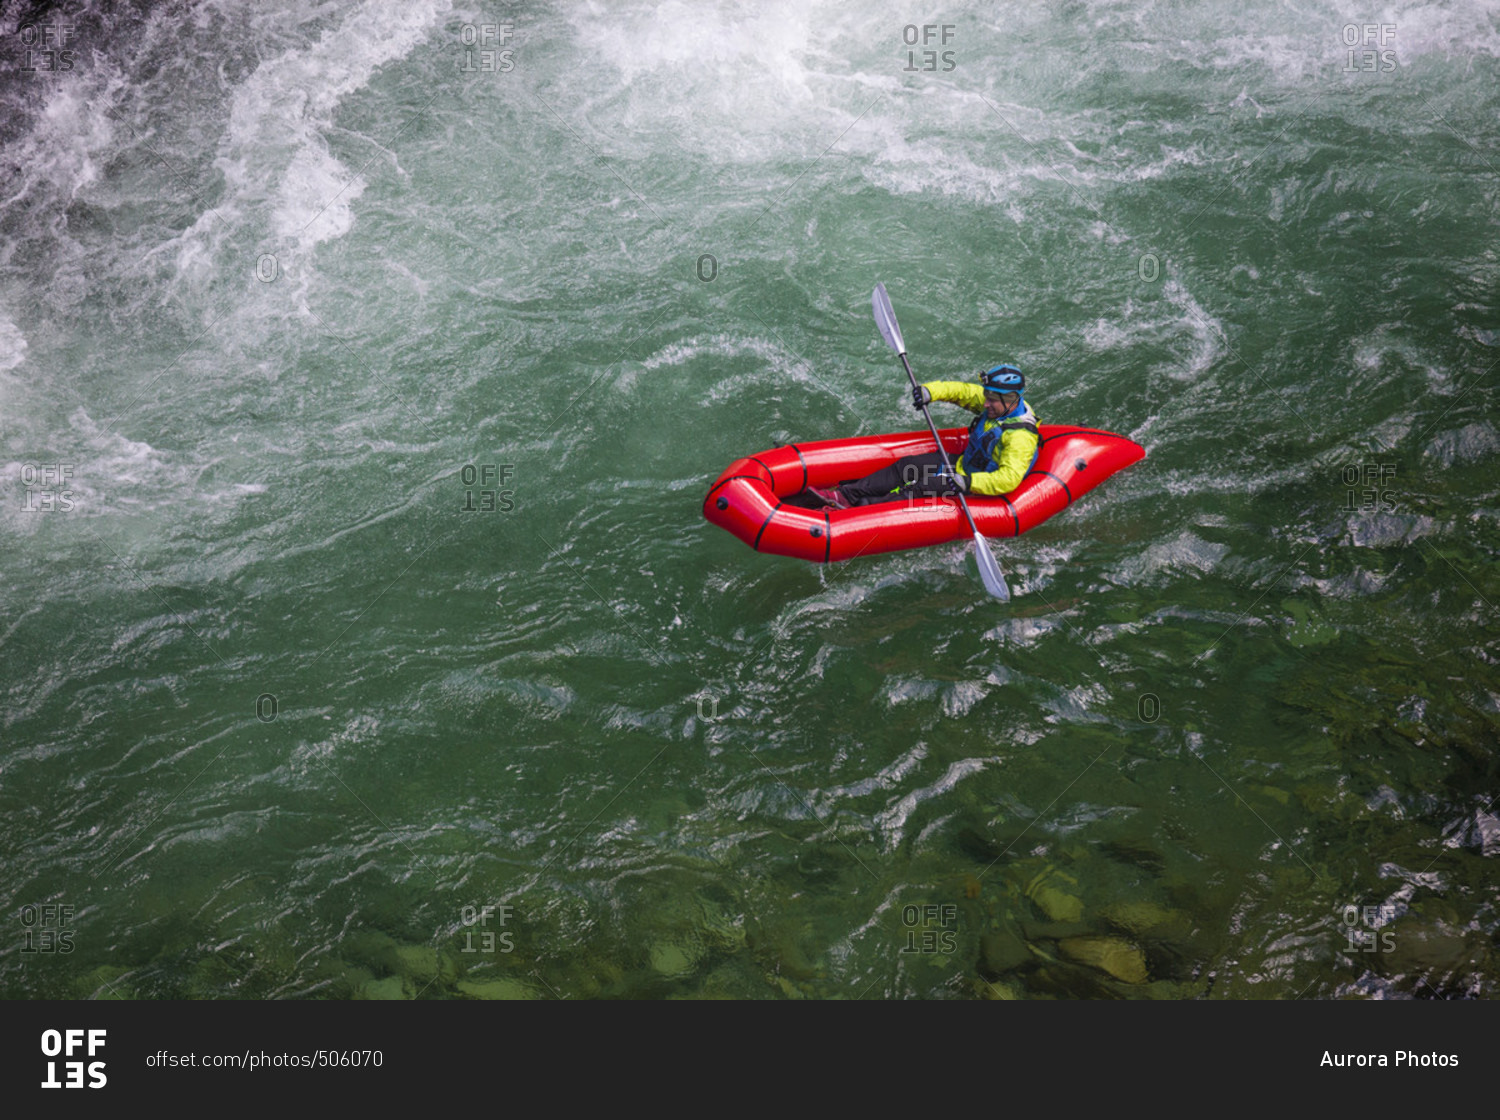 Adam palmer, mountain athlete, navigates a white water section of the Chehalis river on a pack raft